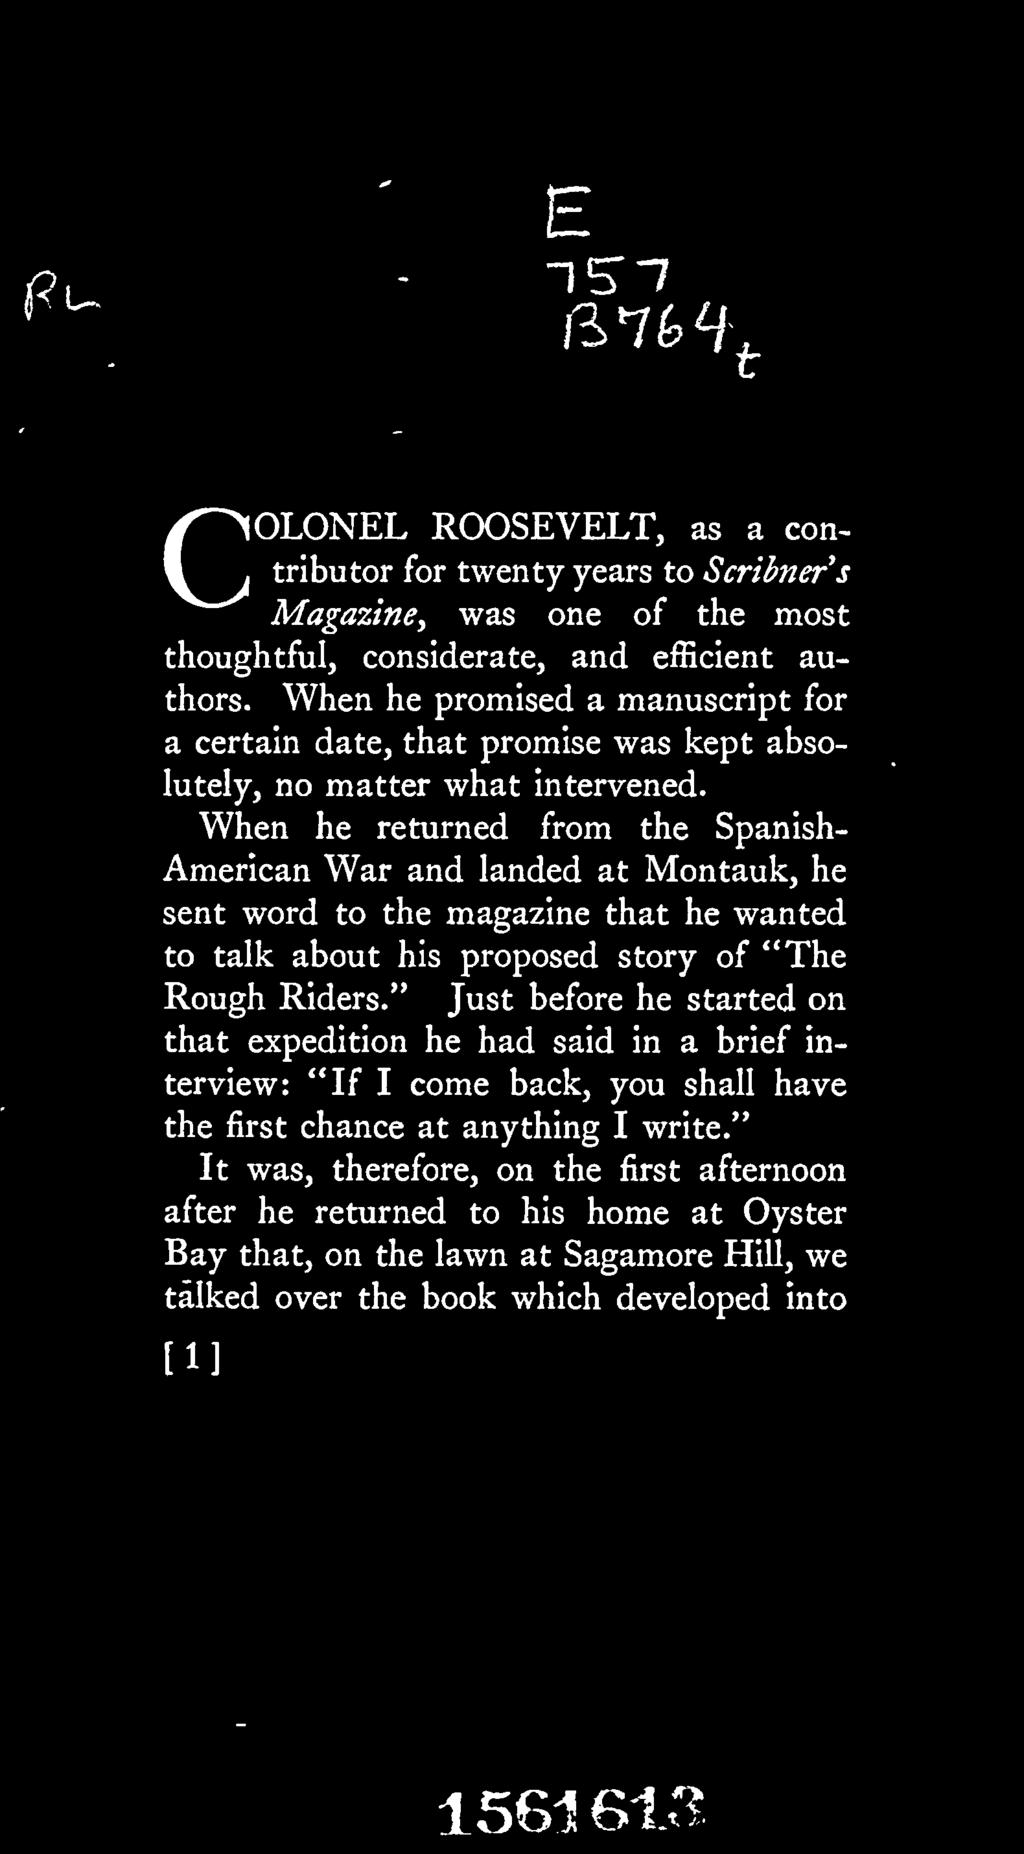 COLONEL ROOSEVELT, as a contributor for twenty years to Scribners Magazine, was one of the most thoughtful, considerate, and efficient authors.